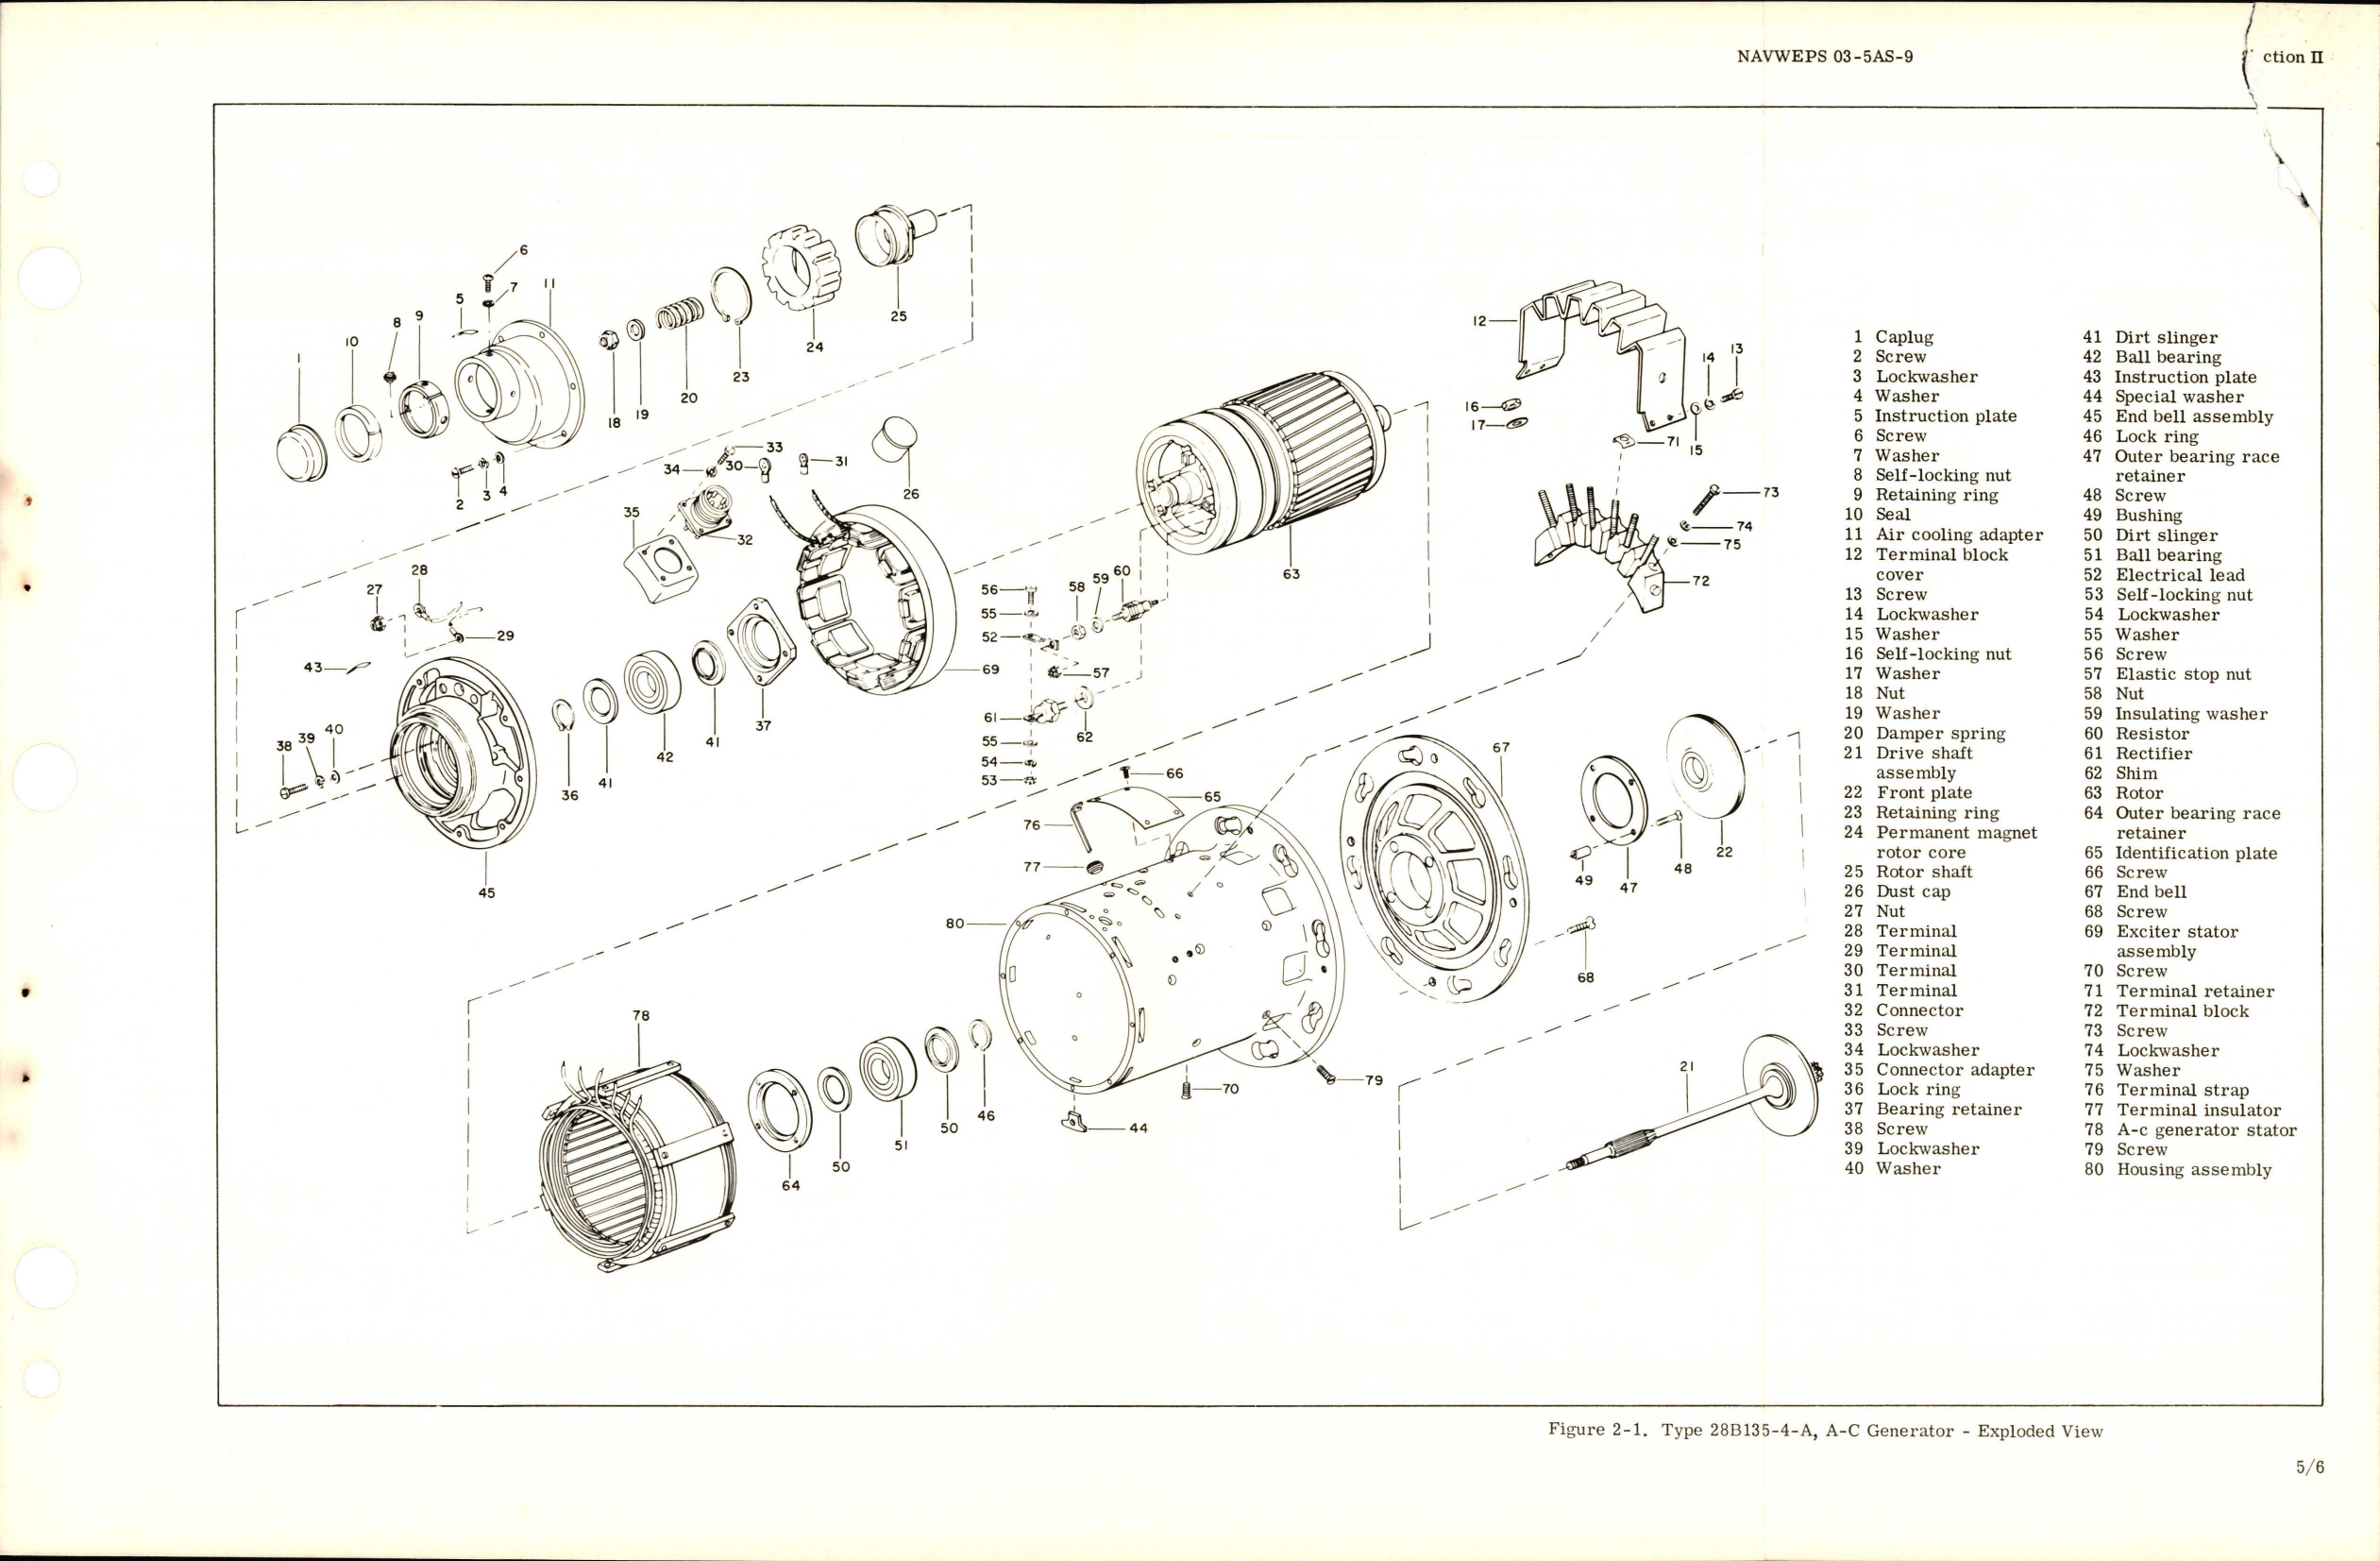 Sample page 9 from AirCorps Library document: Overhaul Instructions for AC Generator - Type 28B135-4-A